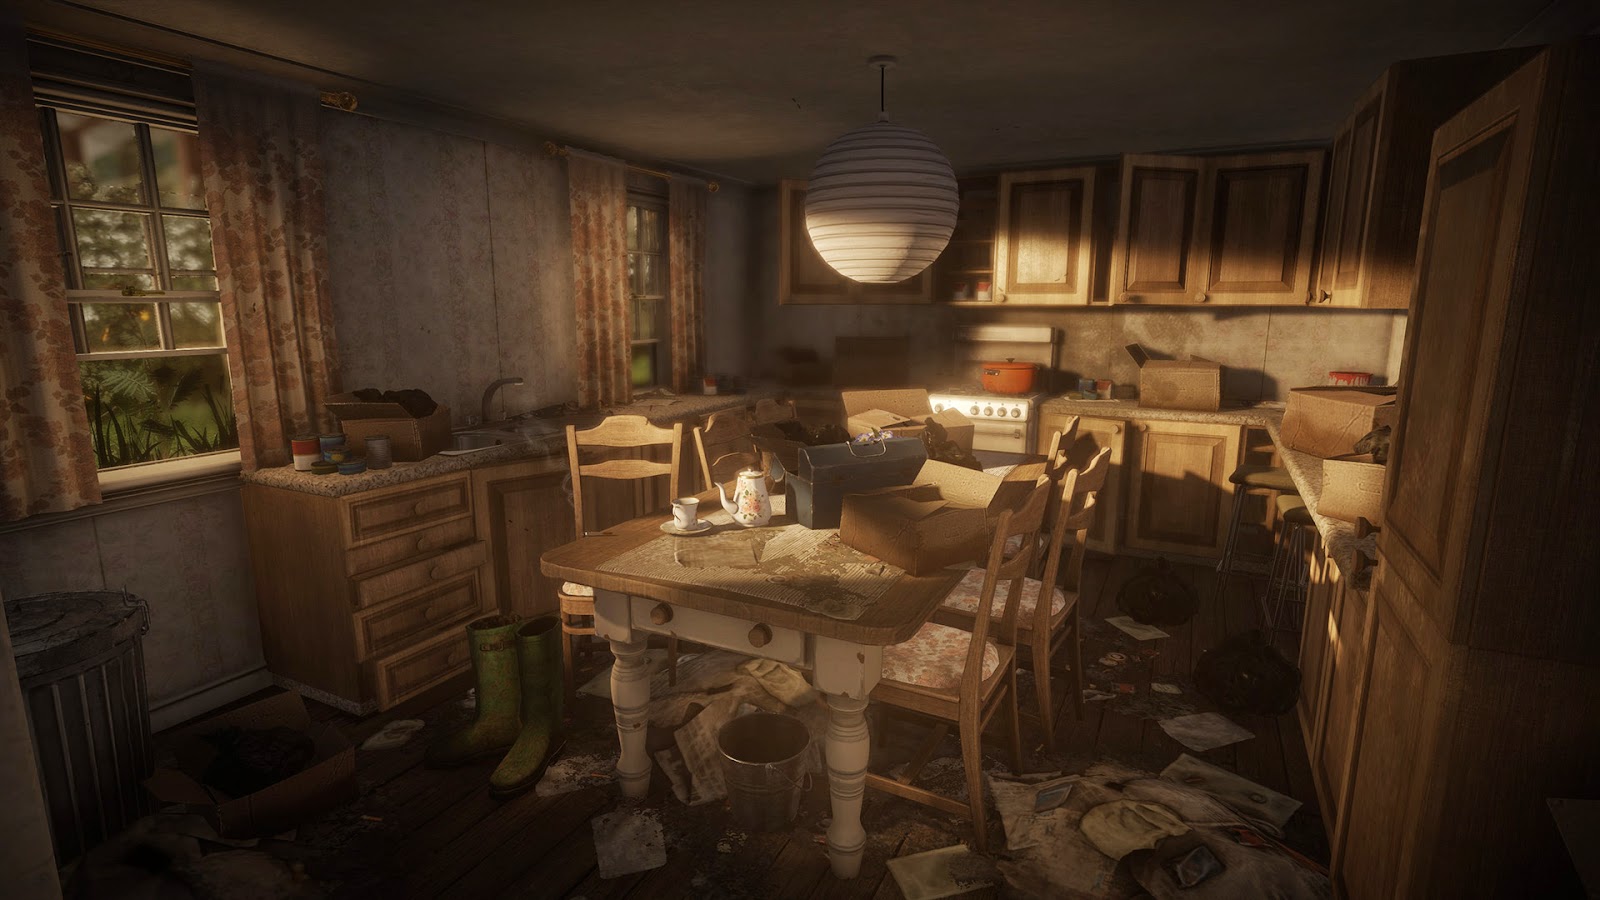 Screenshots de Everybody's Gone to the Rapture NÃO são photoshopadas! Everybodys-Gone-to-the-Rapture-GamesAddcition+(3)